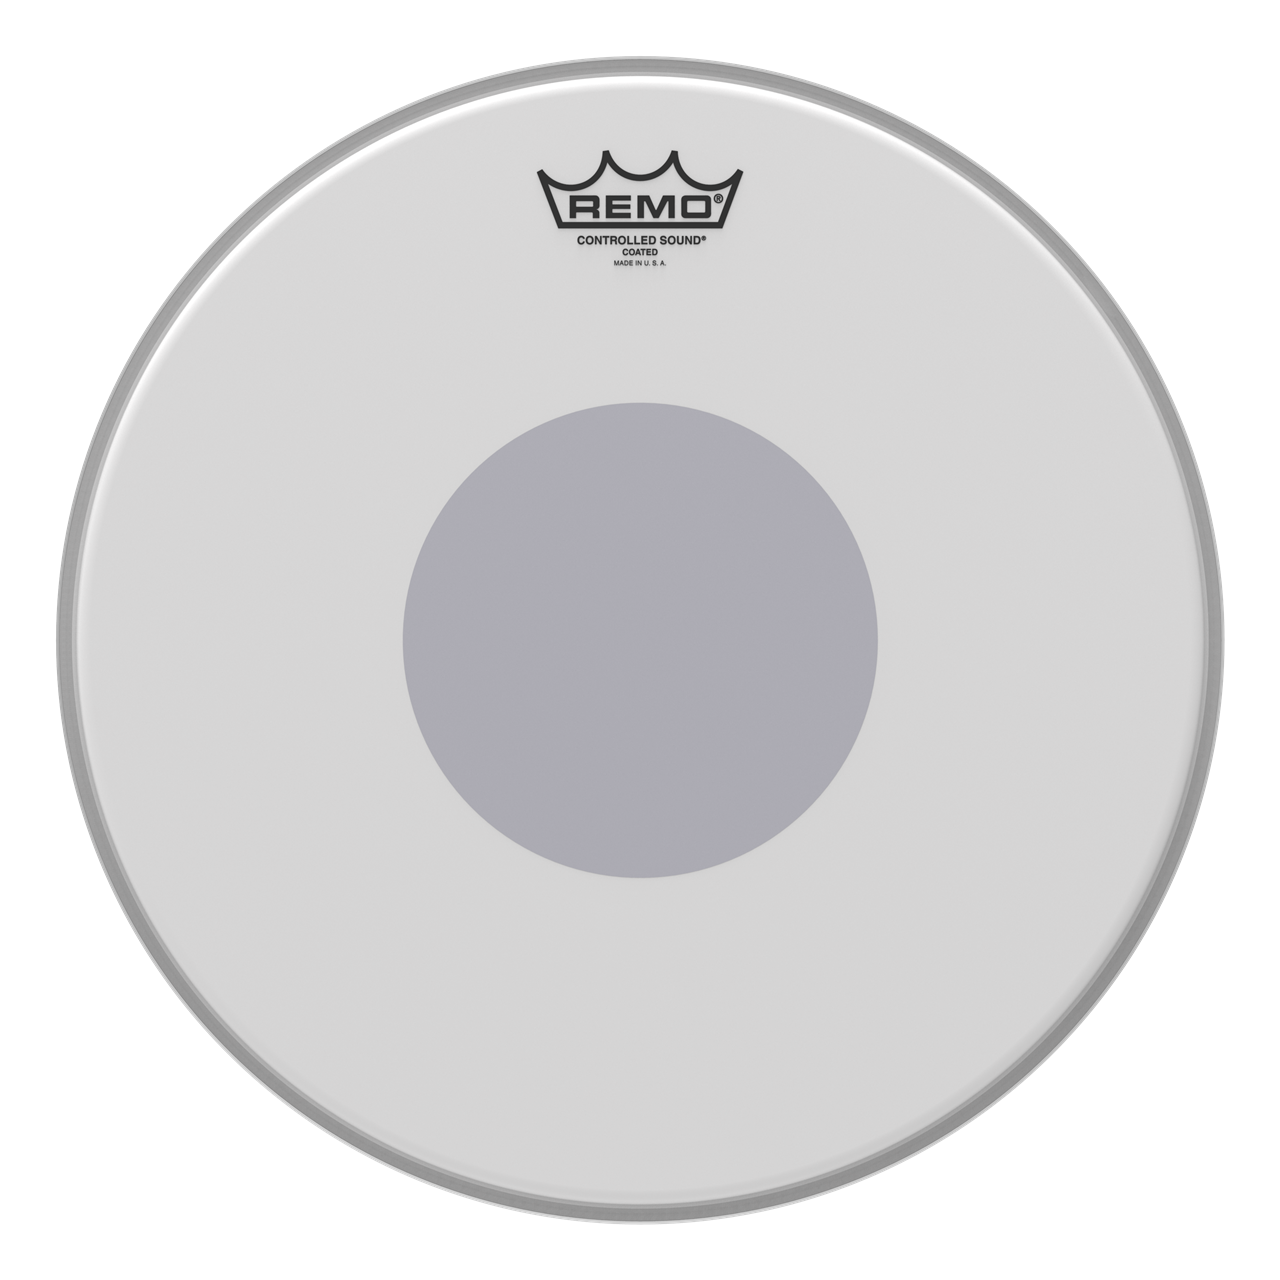 Remo CS-0113-10 Controlled Sound, 13" Coated, Black Dot